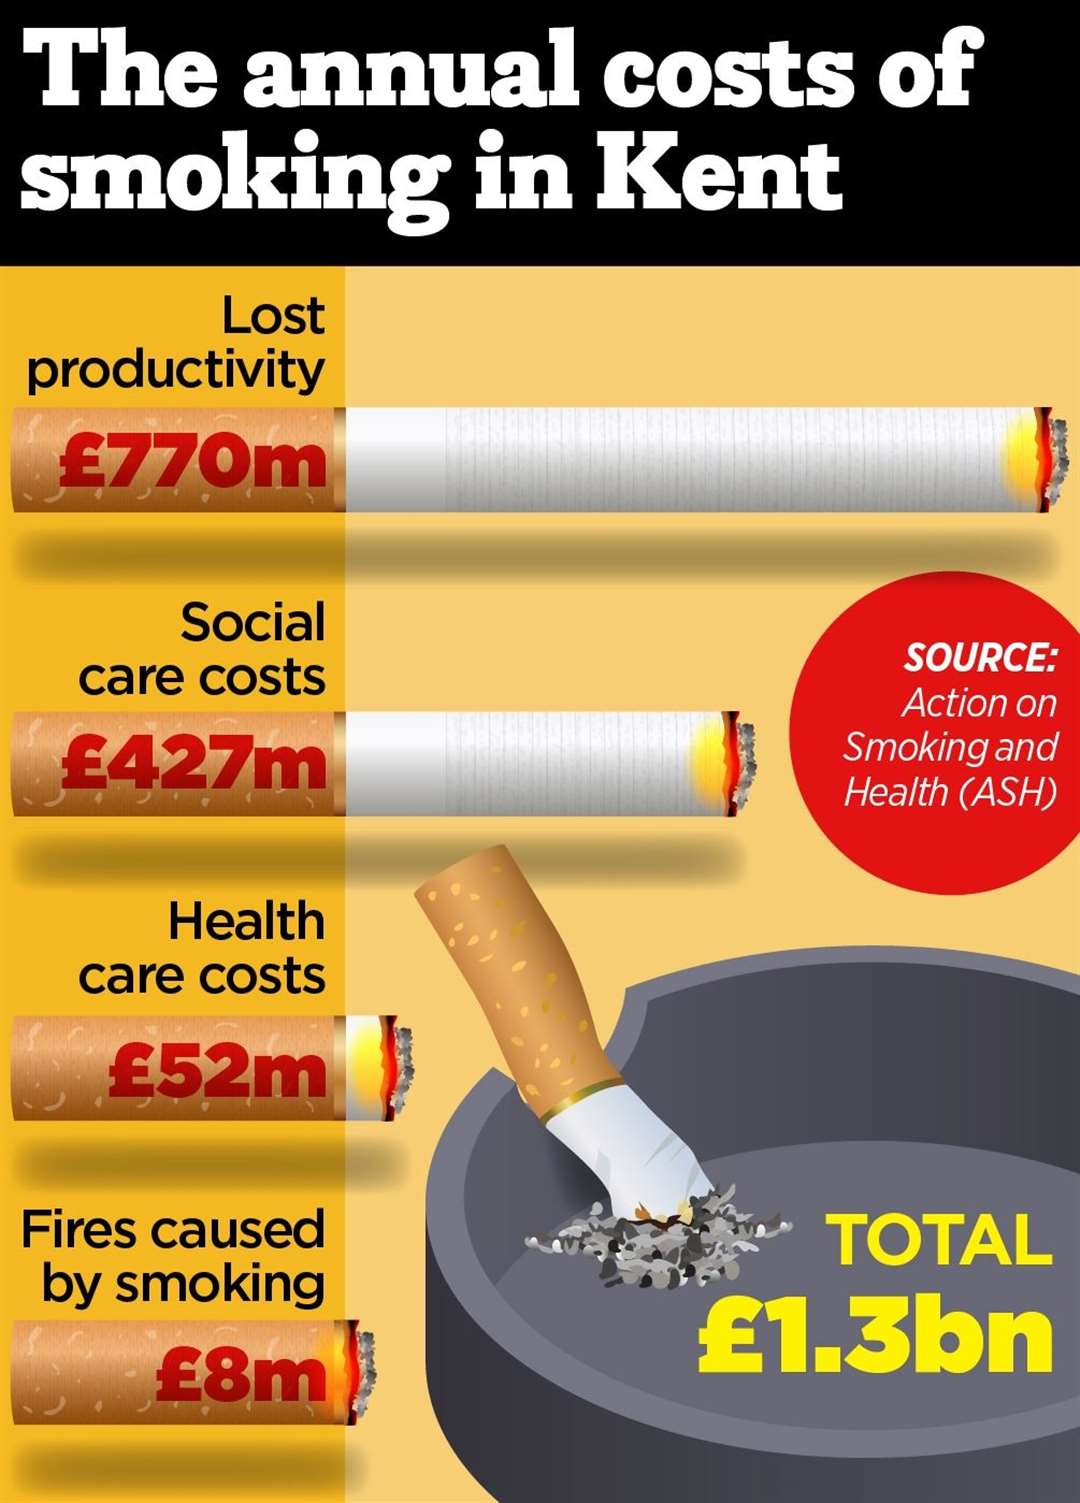 A new report has set out how much smoking costs the county every year